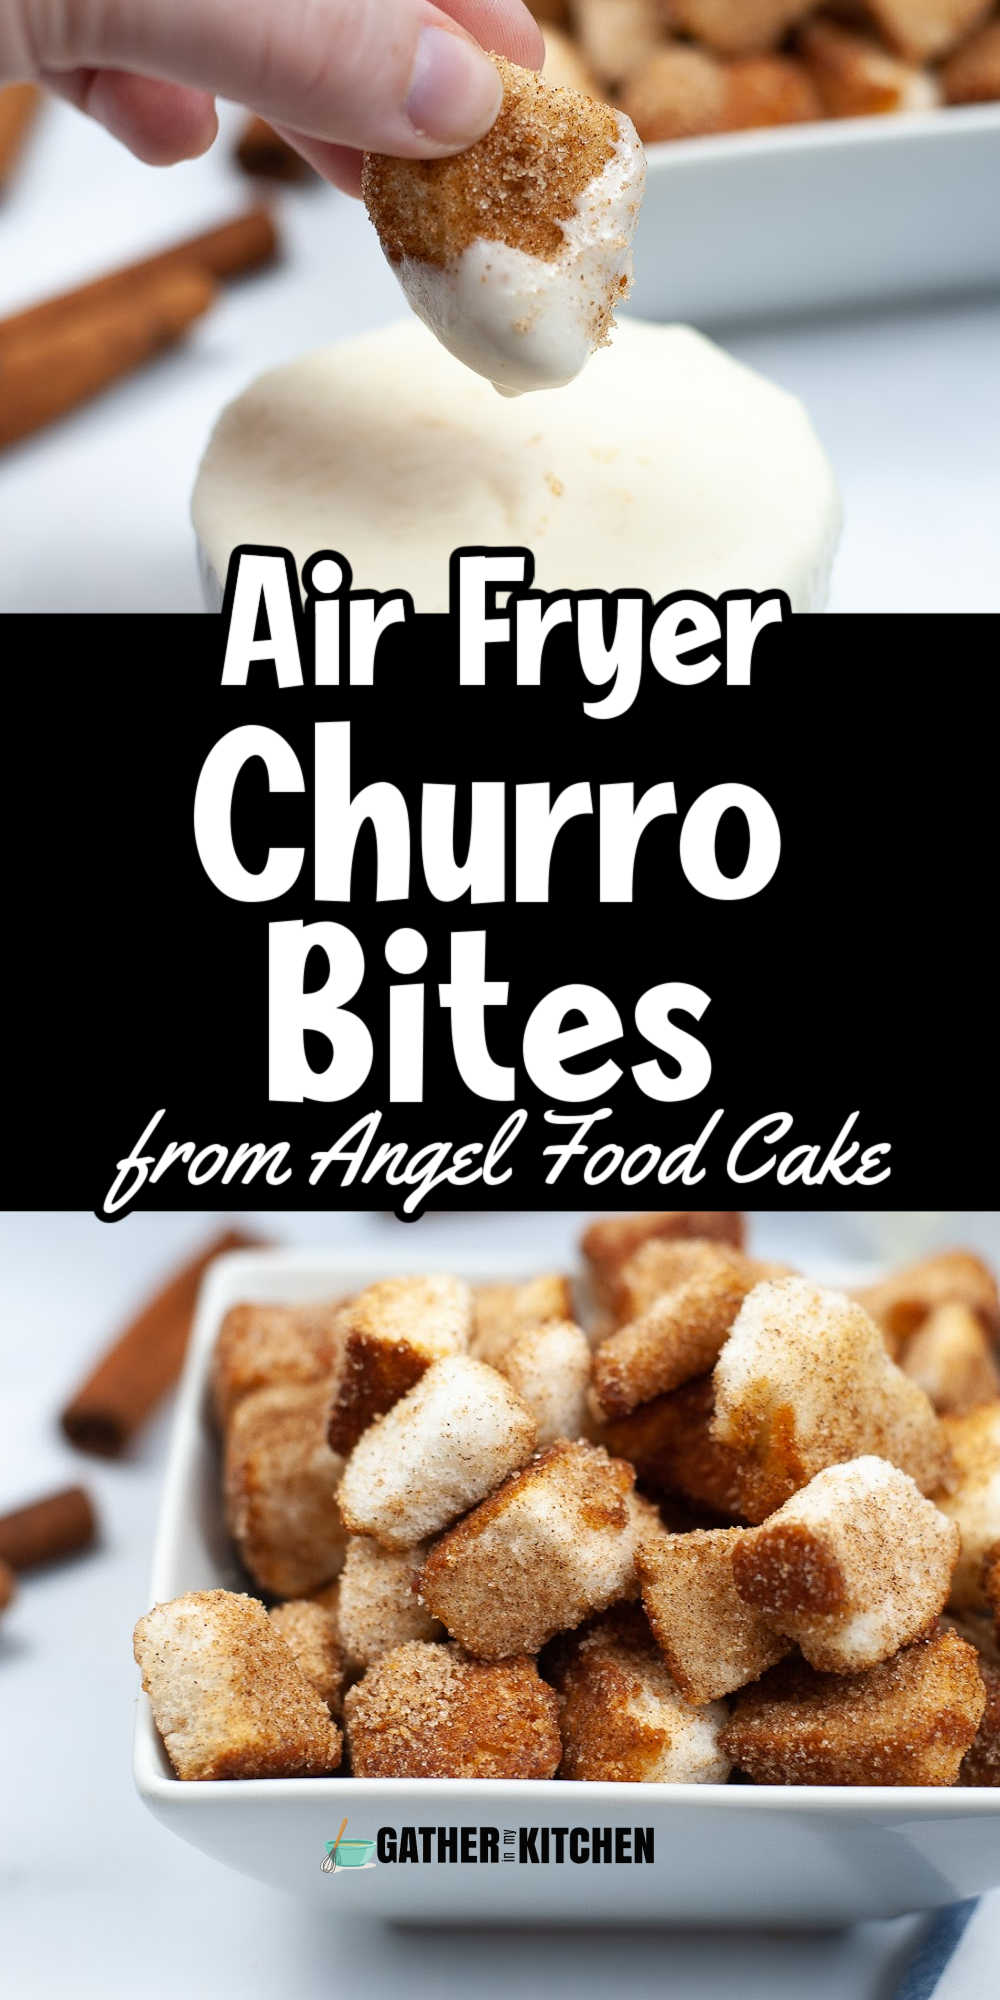 Pin image: top has pic of person dipping air fryer churro bite in creamcheese dip, middle says "Air Fryer Churro Bites from angel food cake" and bottom has a bowl with churro bites overflowing it.